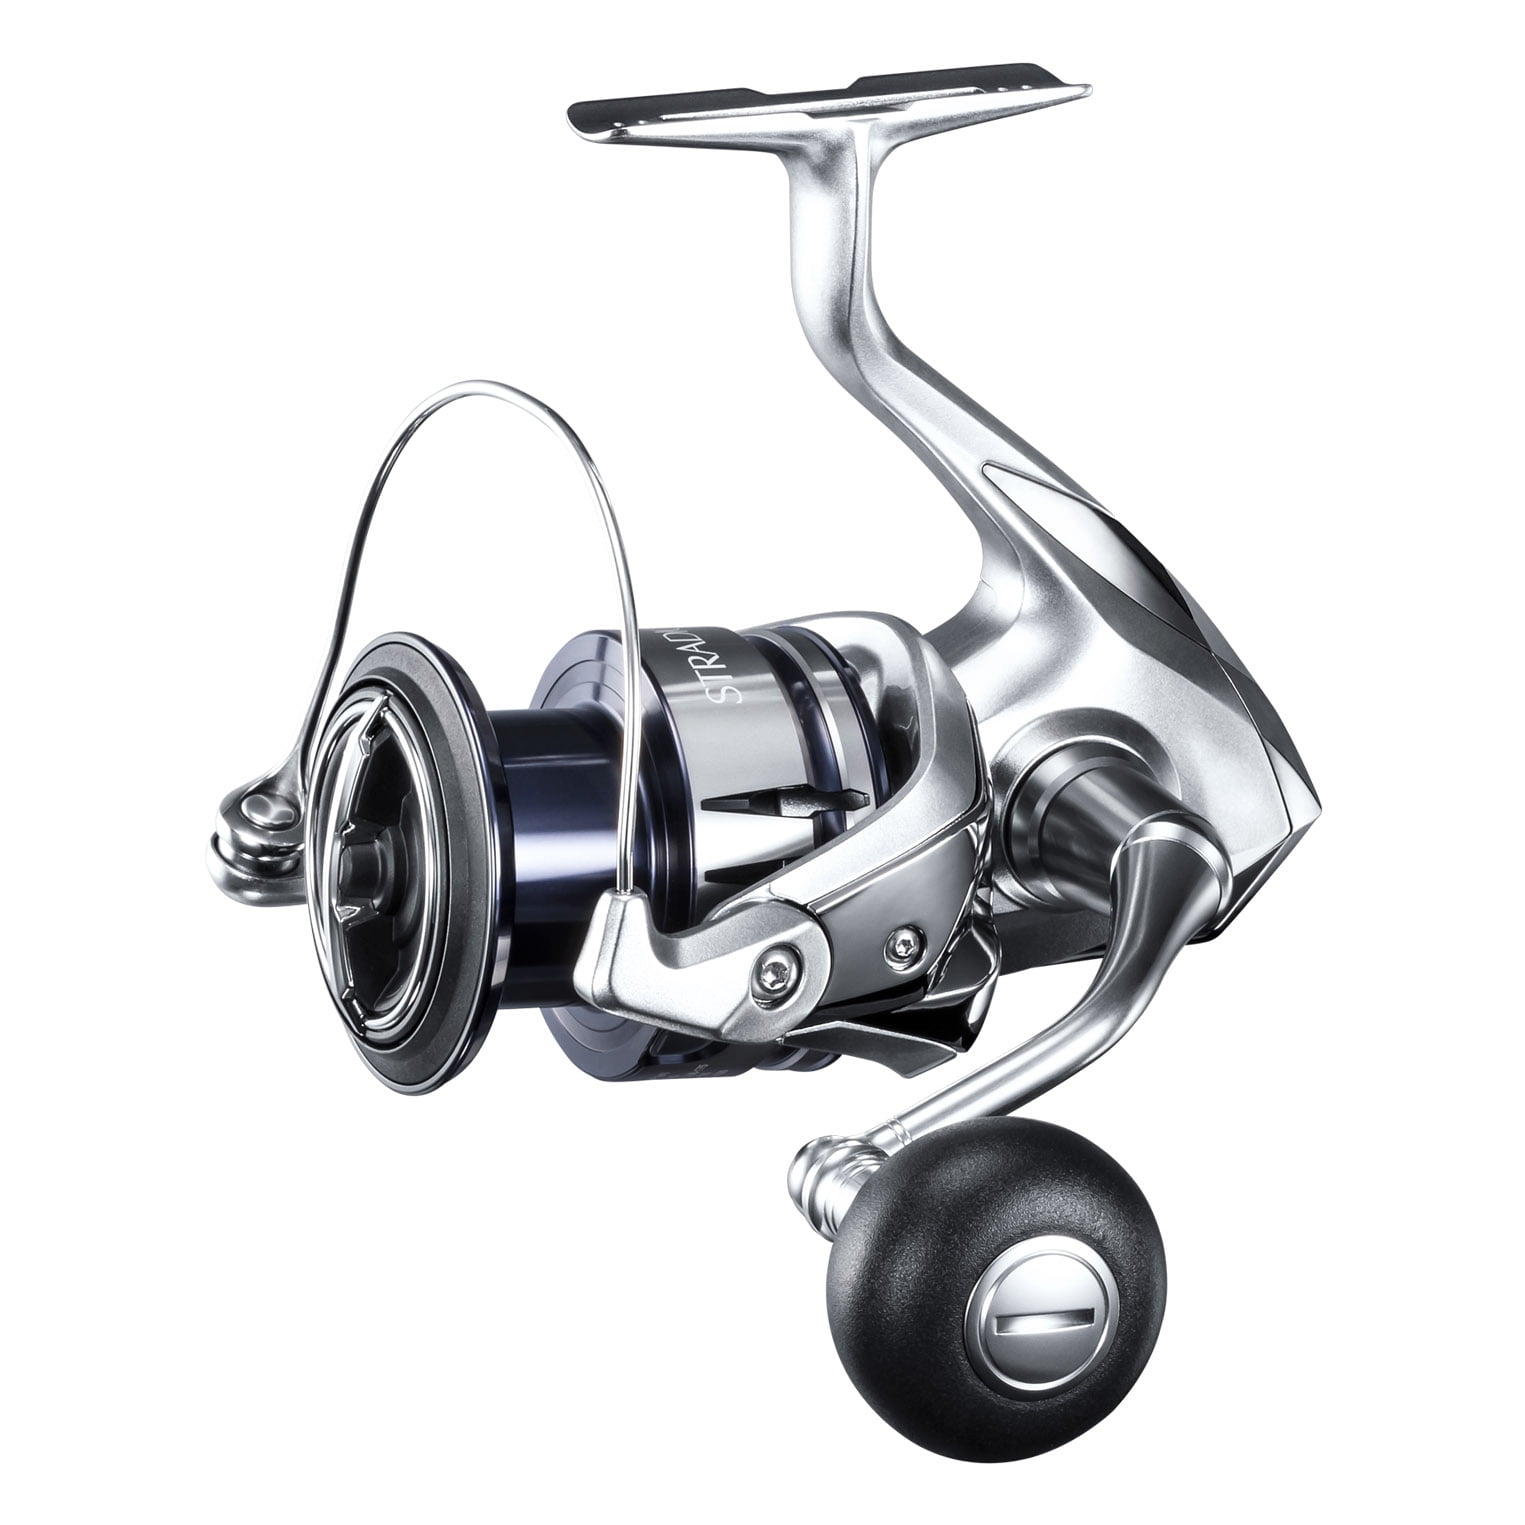 Shimano Spinning Reel 16 Nusky C3000HG Core Protect X-SHIP 250g 195546 